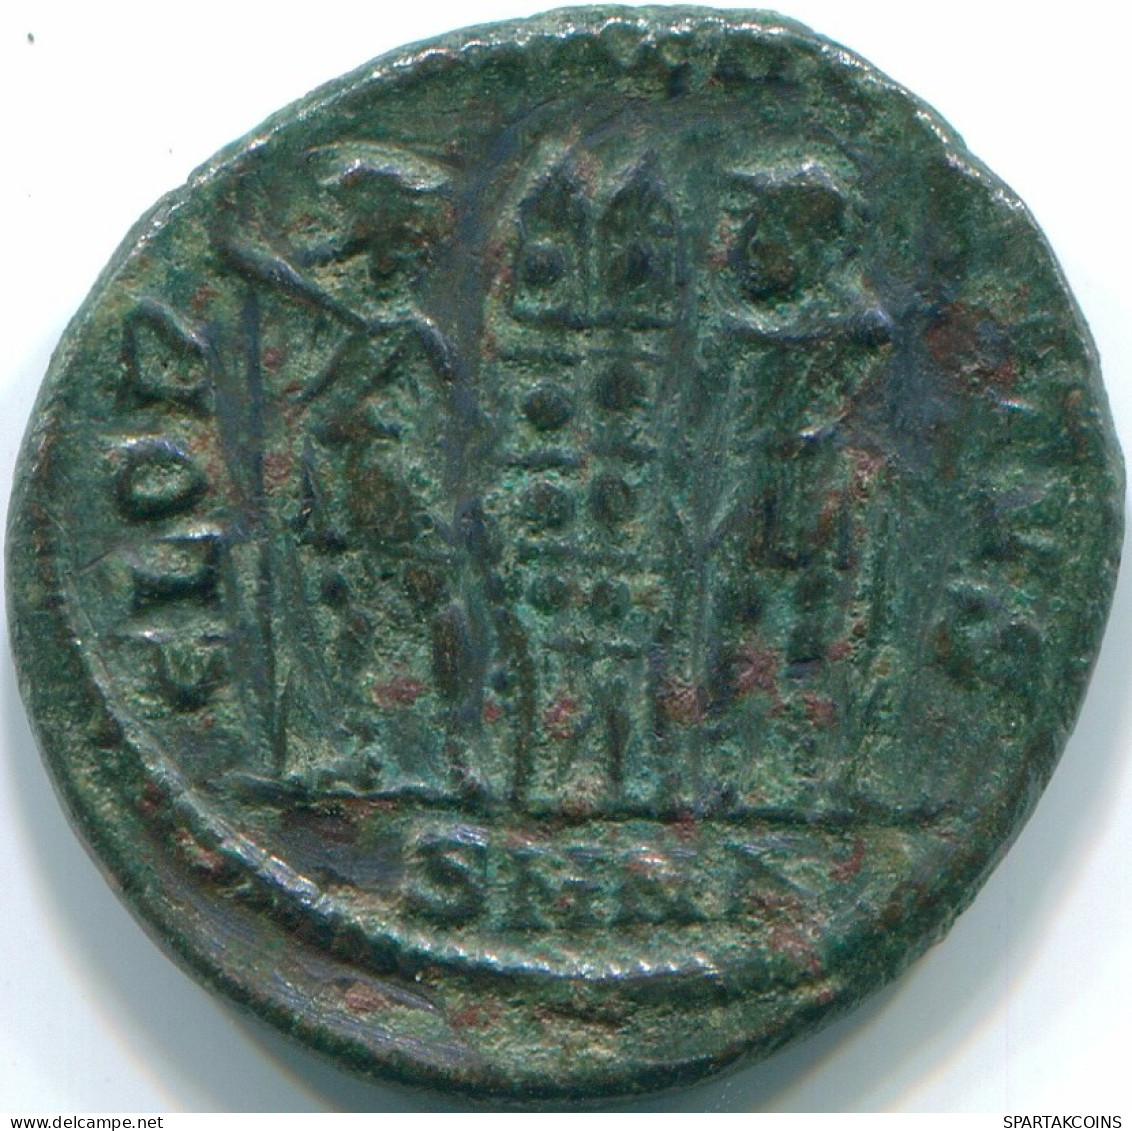 CONSTANTINE II Heraclea Mint AD 330-333 Two Soldiers 2.45g/17.7mm #ROM1033.8.D.A - The Christian Empire (307 AD Tot 363 AD)